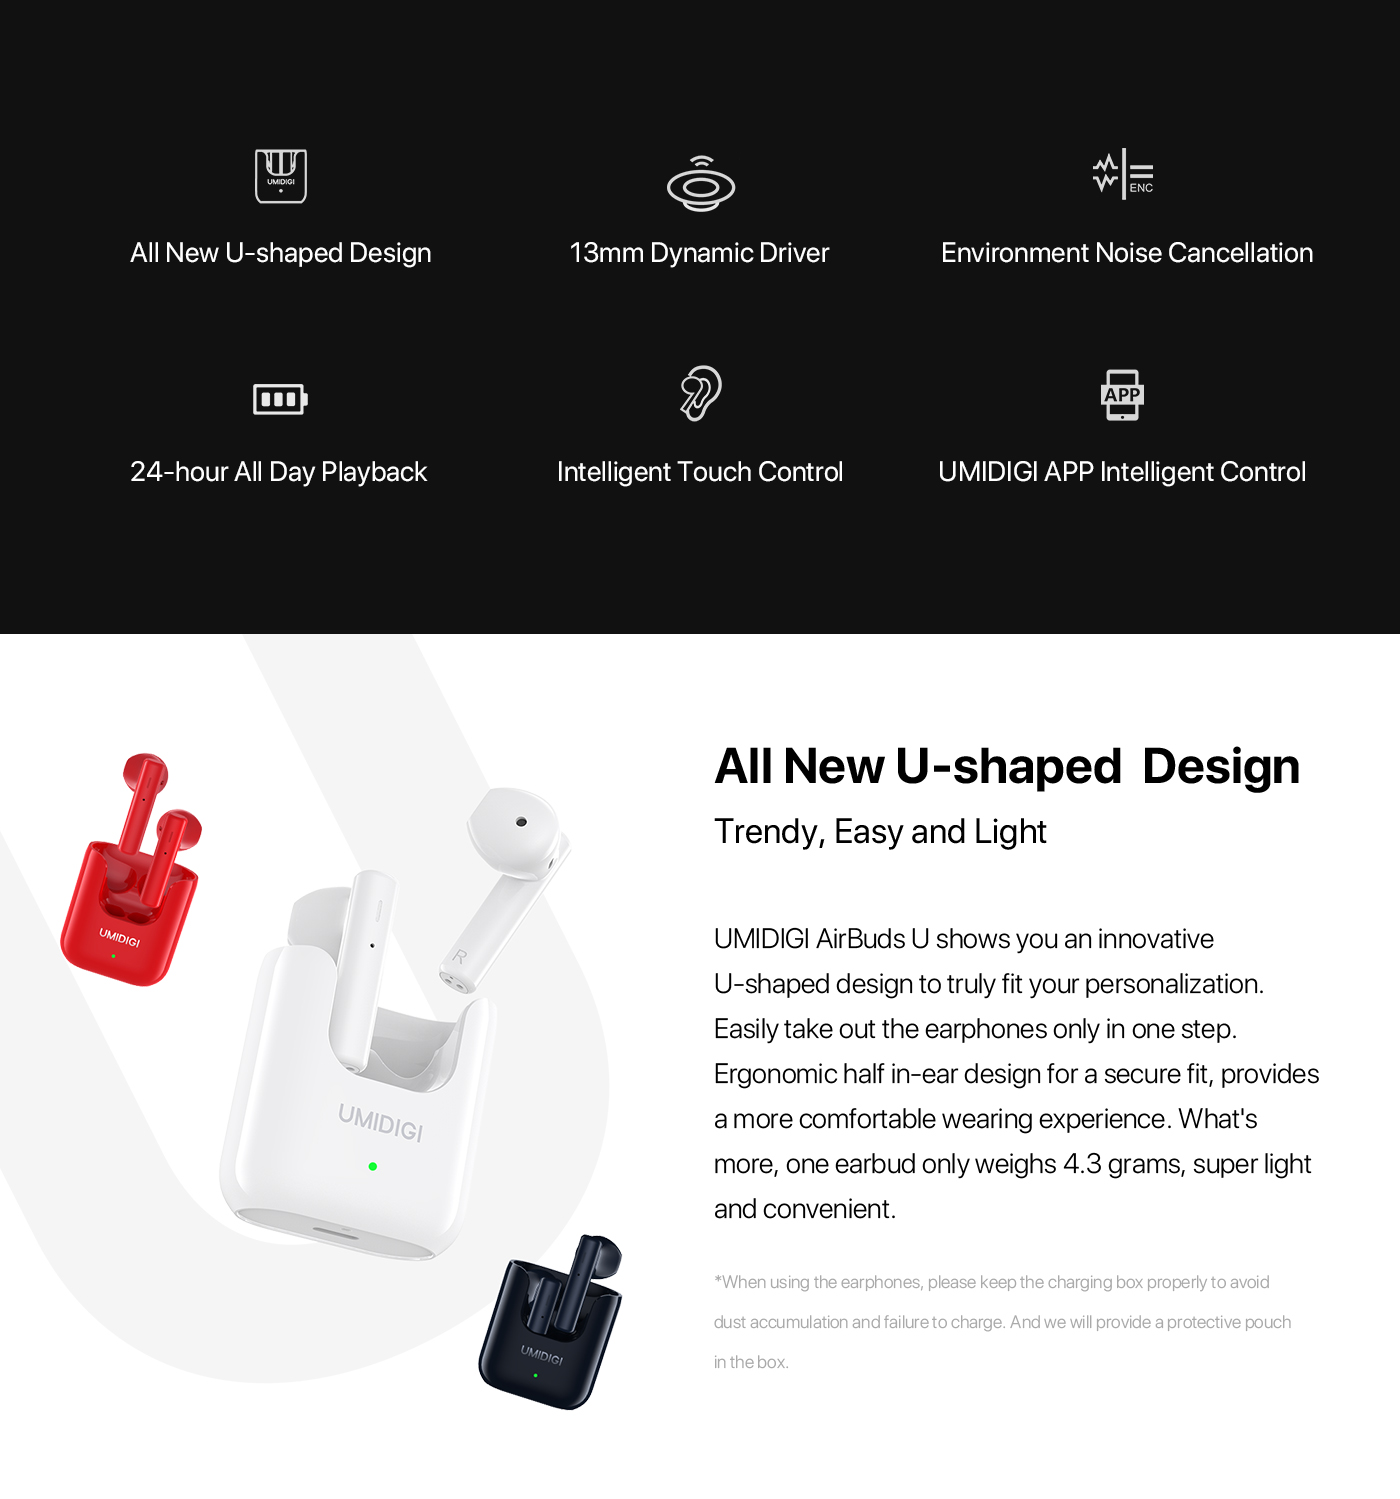 UMIDIGI AirBuds U TWS Wireless Earphones bluetooth 5.1 ENC Noise Reduction 380mAh Charging Box Sports Headsets With Microphone